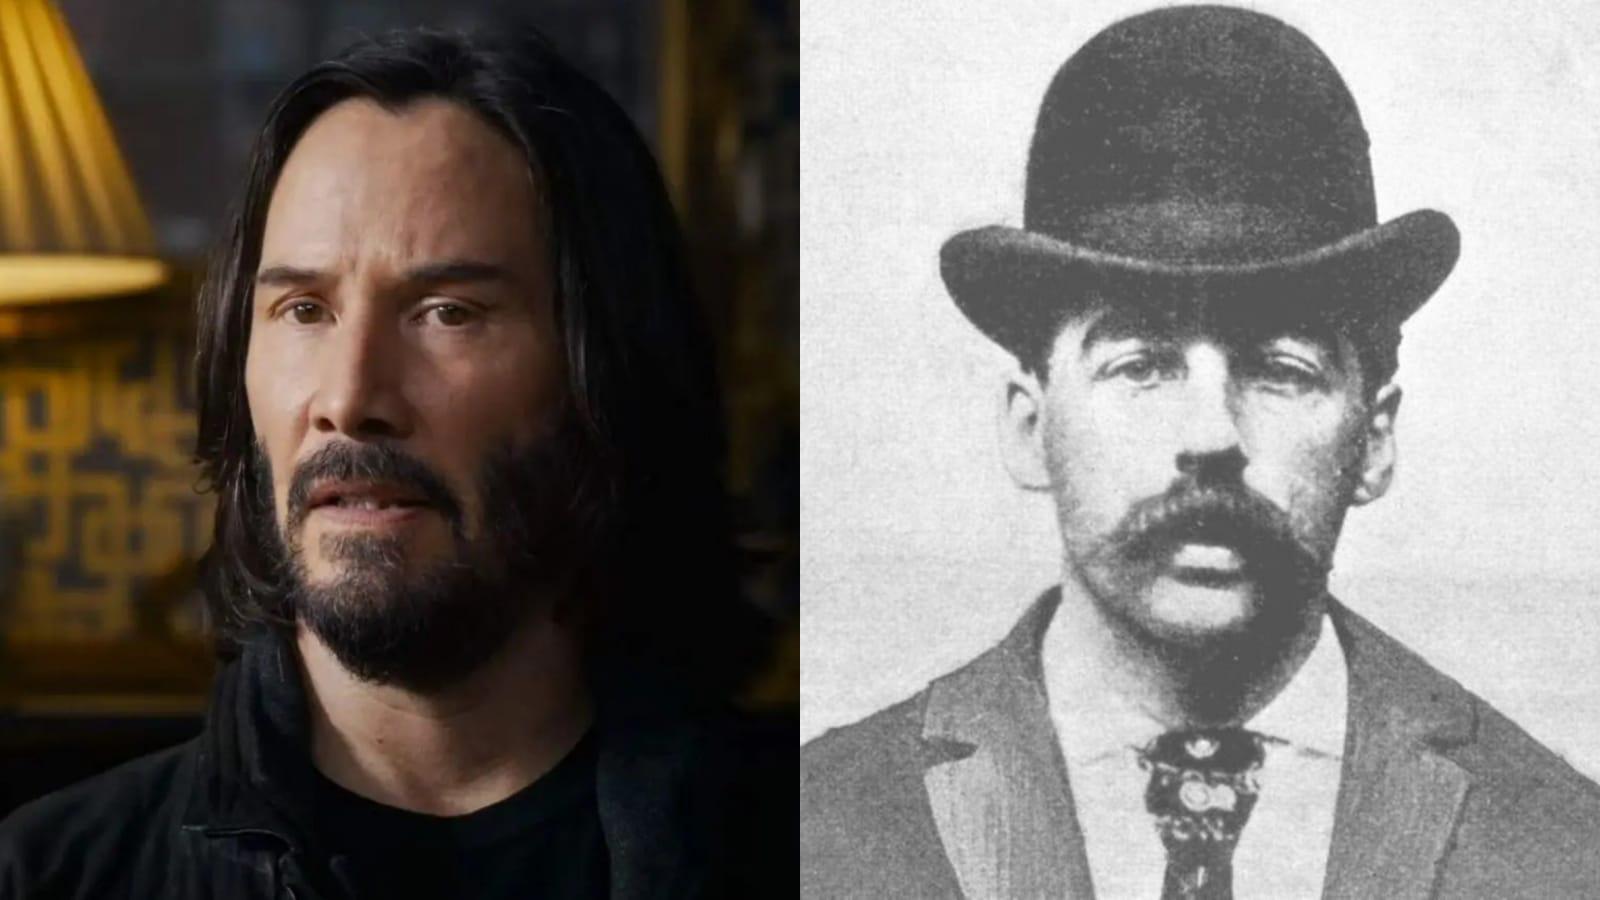 Keanu Reeves in The Matrix Resurrections and a mugshot of H.H. Holmes, the serial killer at the heart of The Devil in the White City